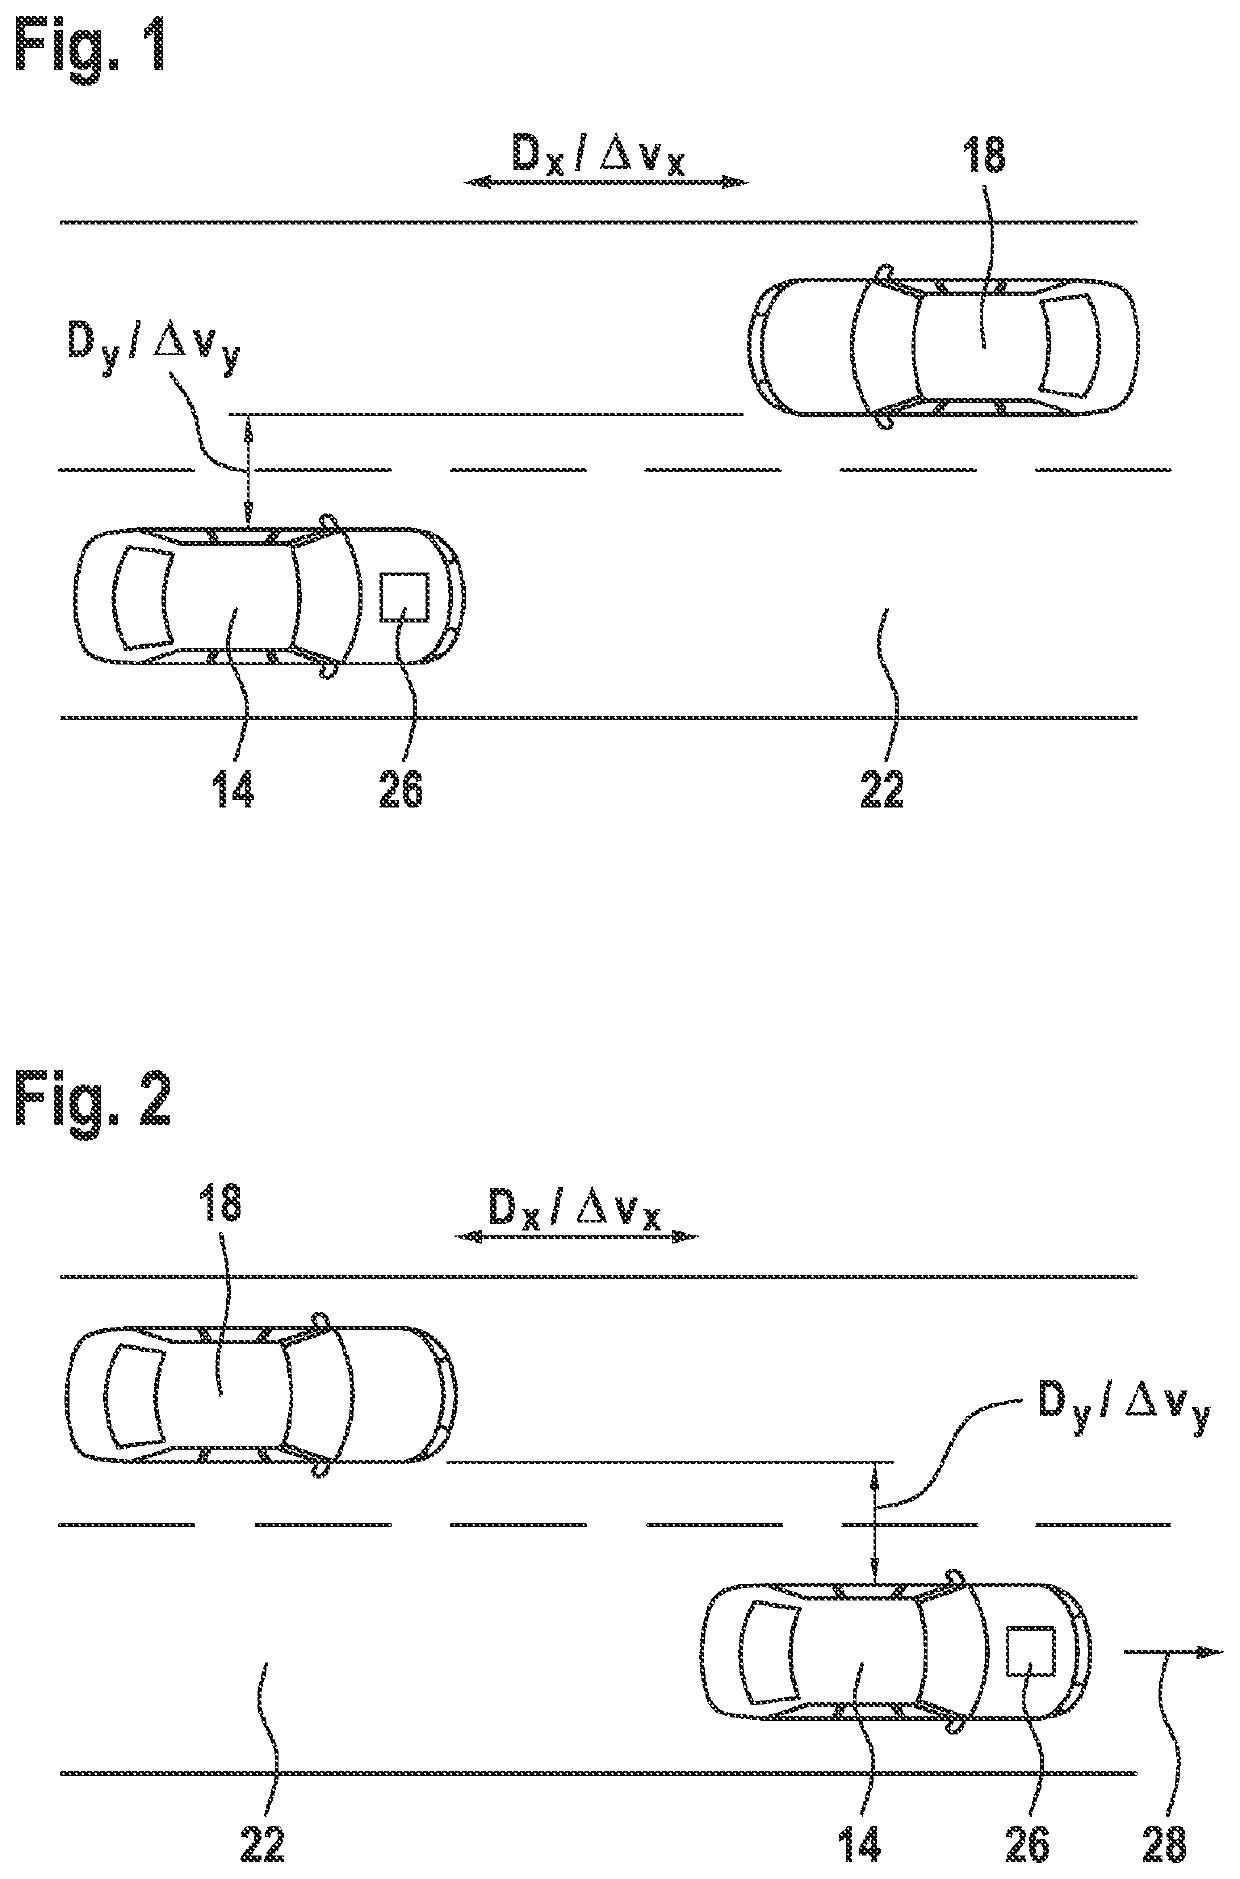 Method for preparing and/or performing a steering intervention that assists the driver of a vehicle